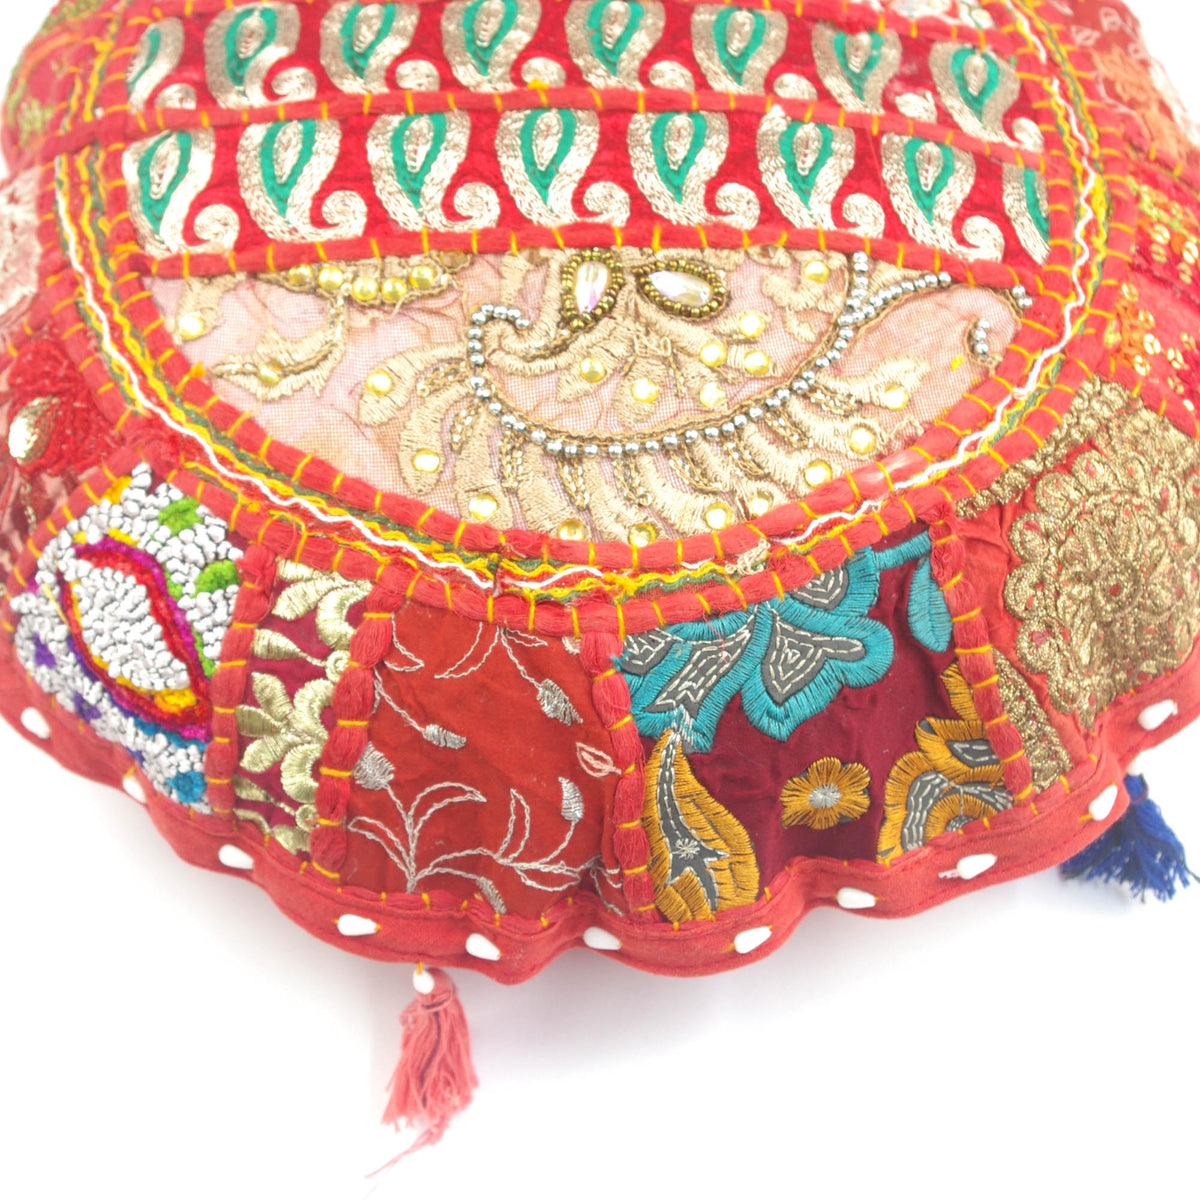 Round Red Floor Embroidered Patchwork Pouf Ottoman Indian Vintage Cushion Cover 18"